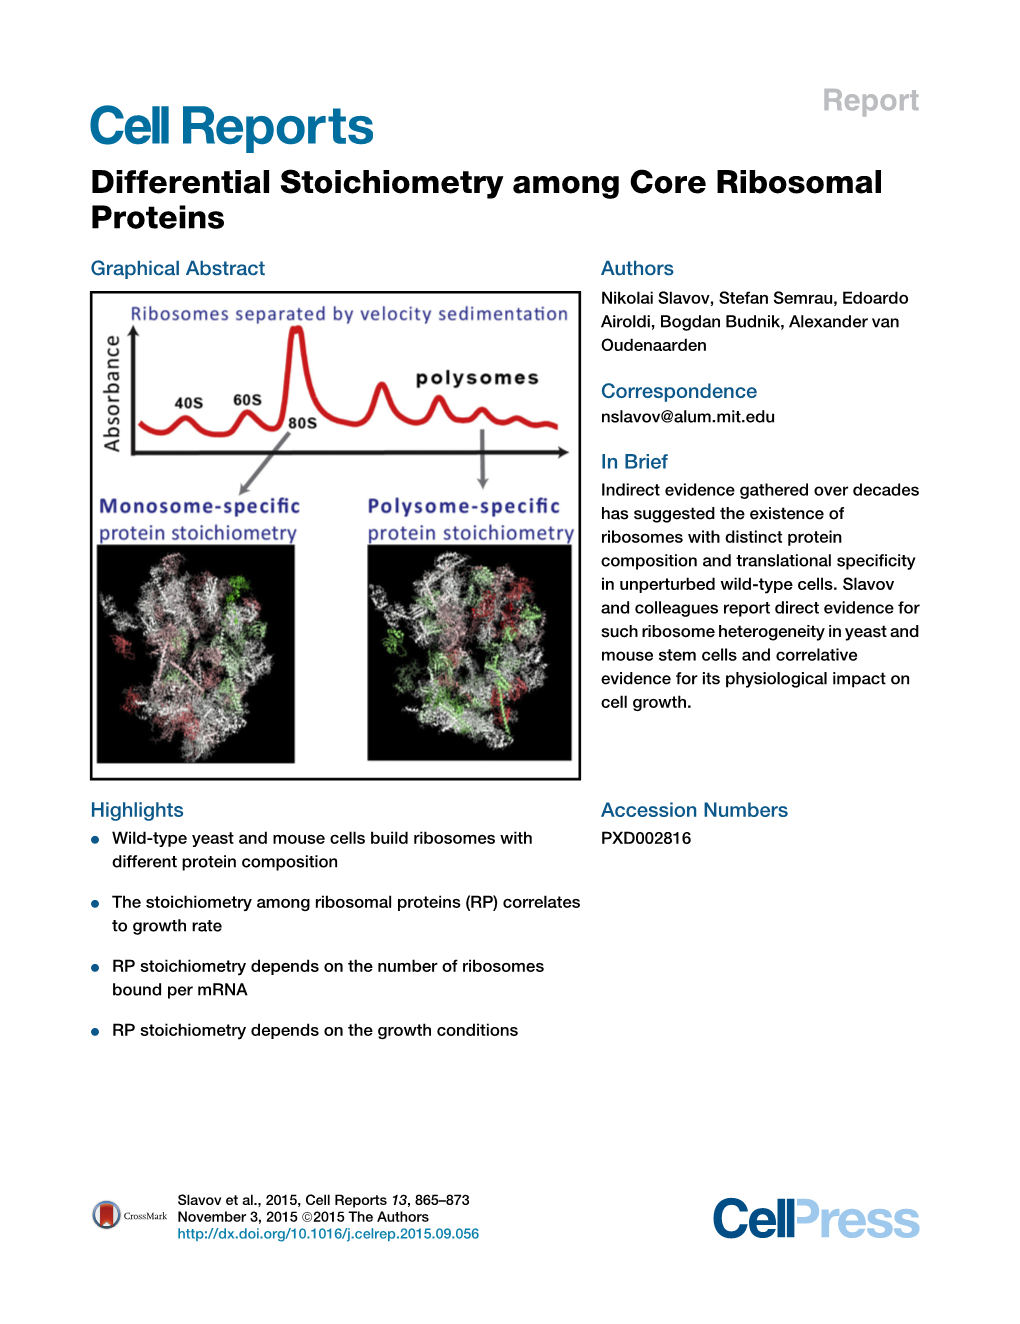 Differential Stoichiometry Among Core Ribosomal Proteins